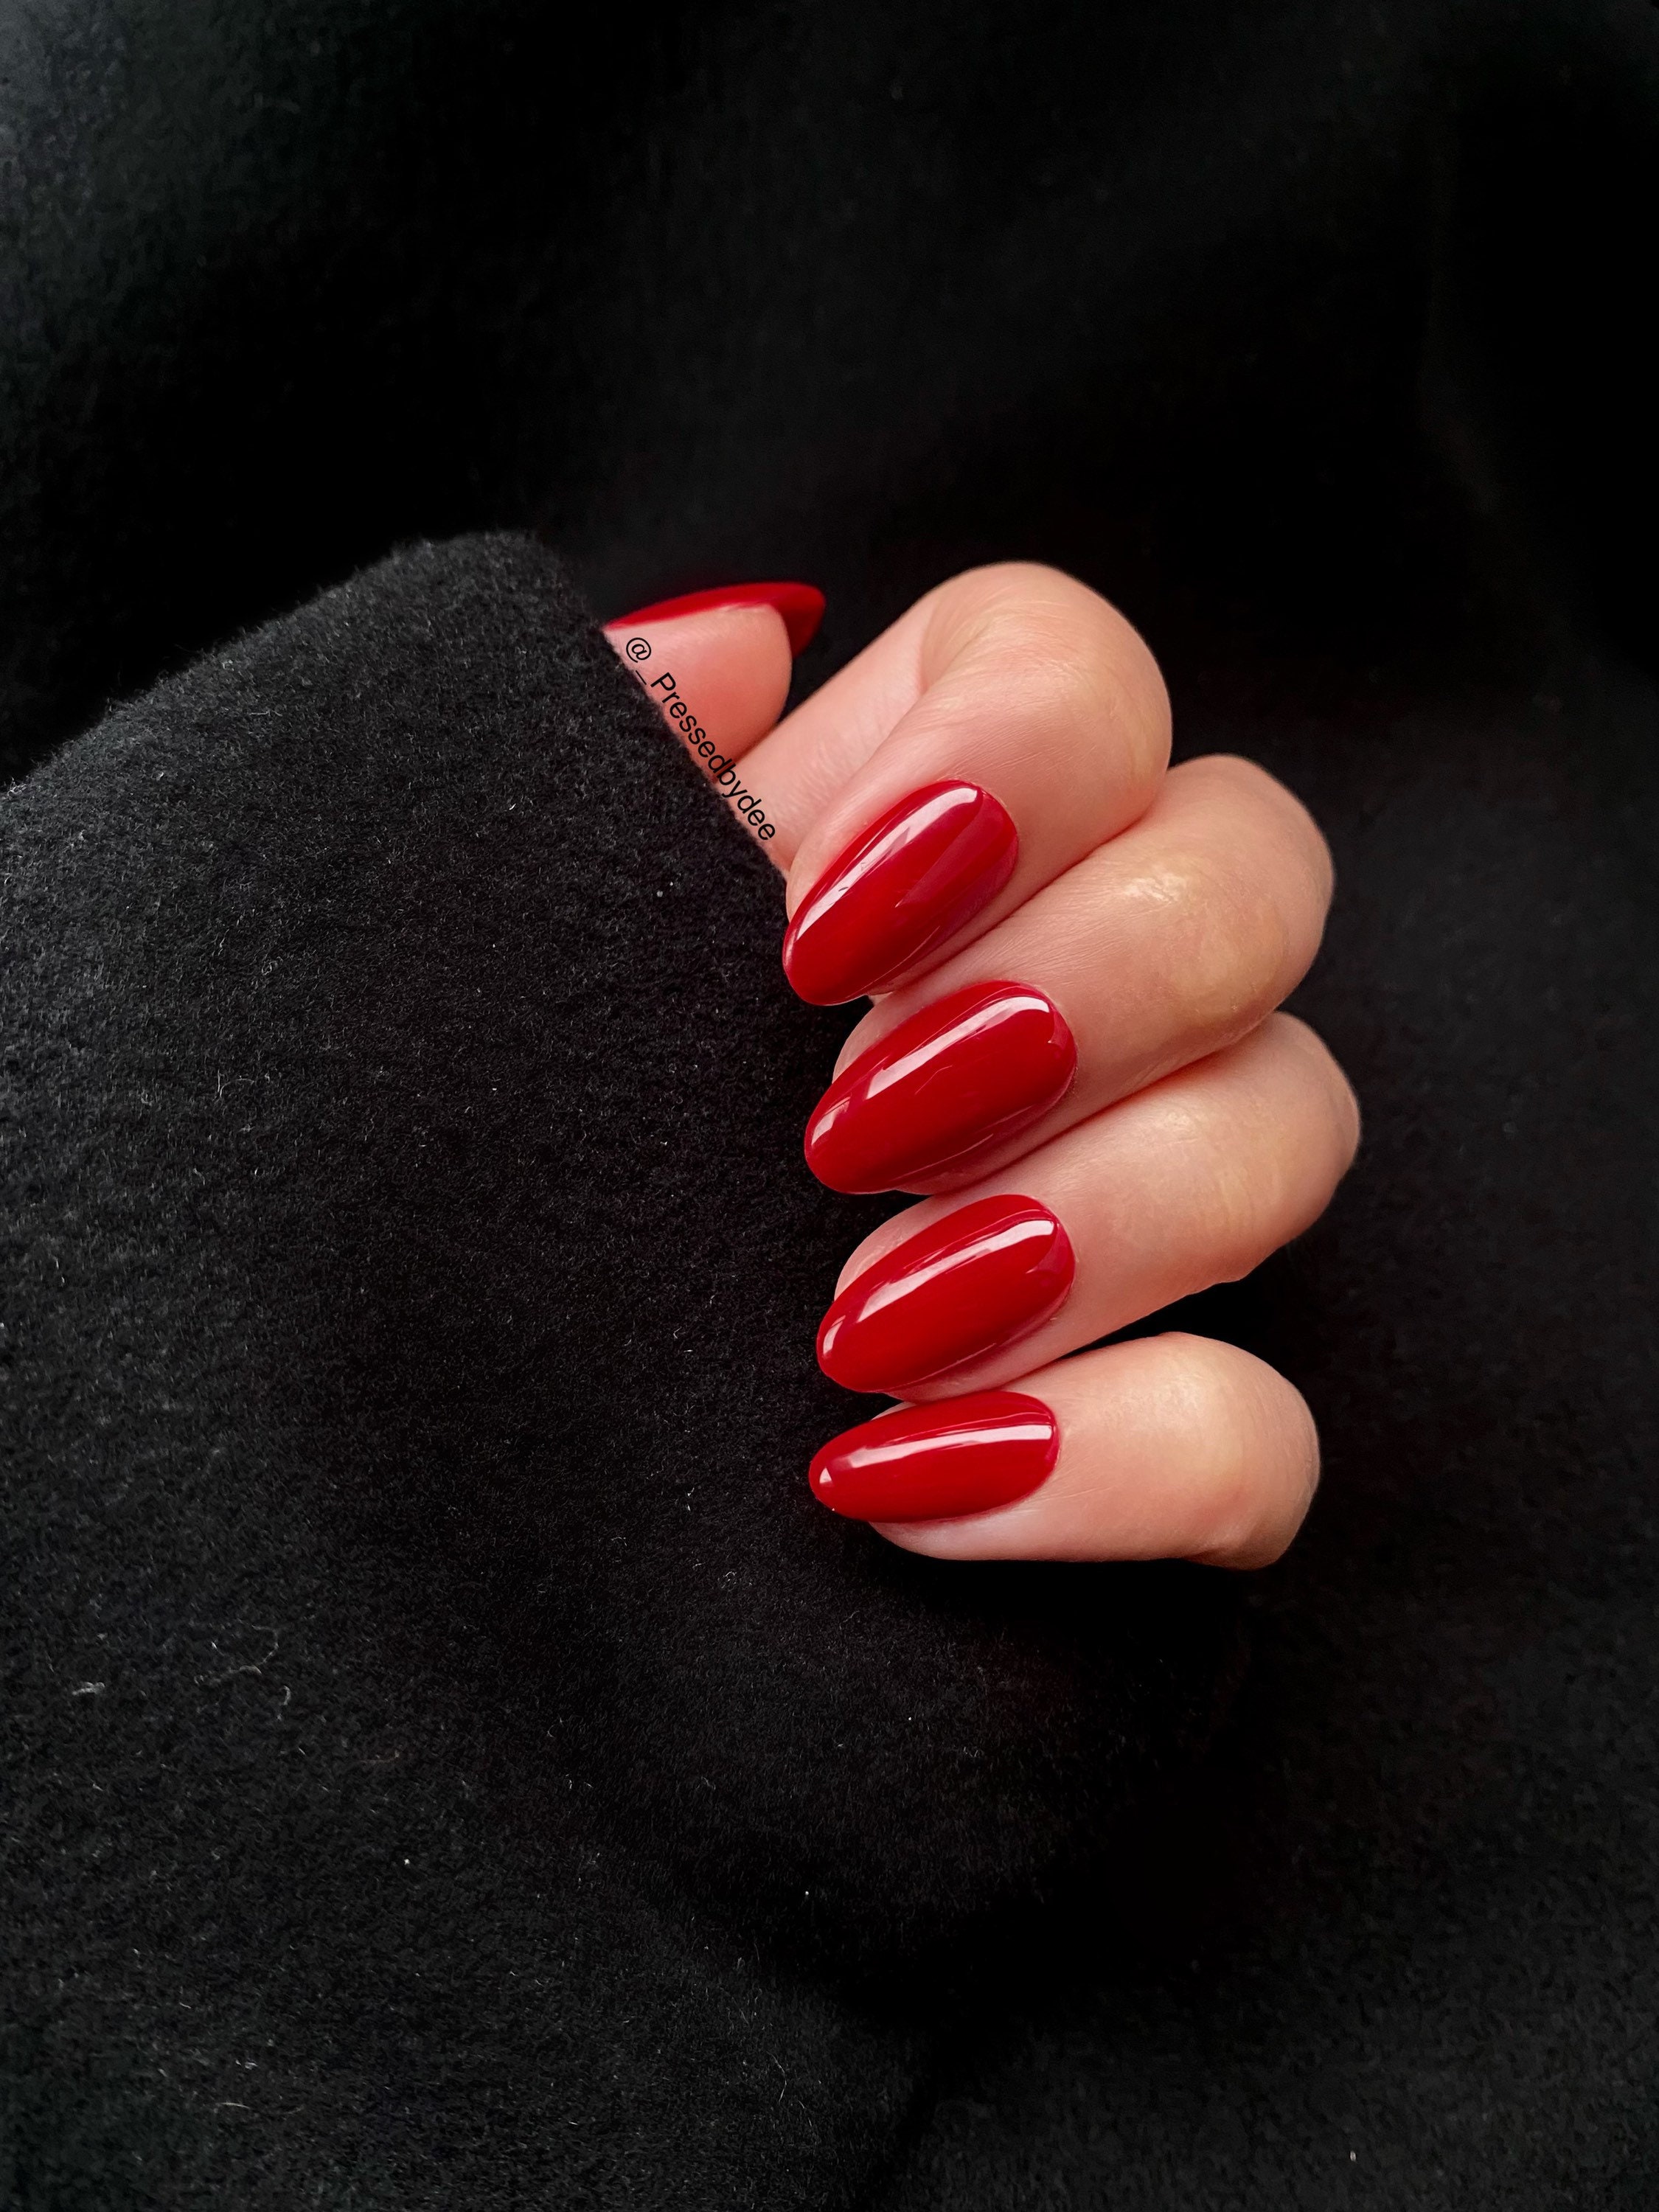 Amazon.com: 24 Pcs Red Press on Nails Short Stiletto Almond - YEFIUO Winter  Fake Nails Press ons French Nail Tip with Solid Color Design Full Cover  Festive Christmas False Nails Glue on